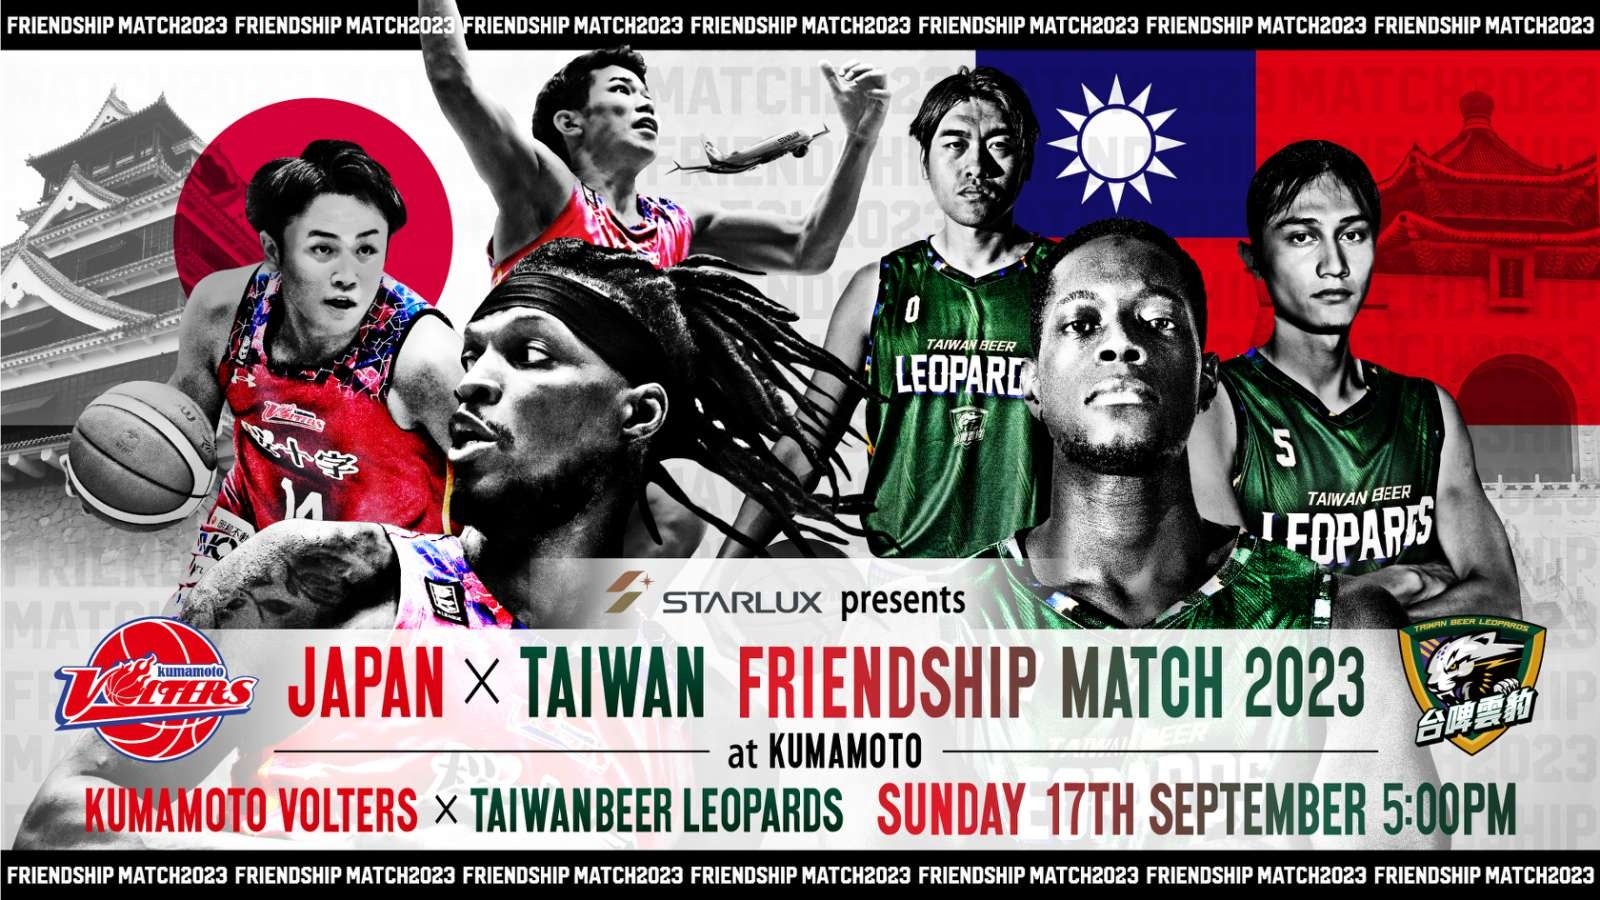 『STARLUX Airlines presents FRIENDSHIP MATCH』の開催が決定！